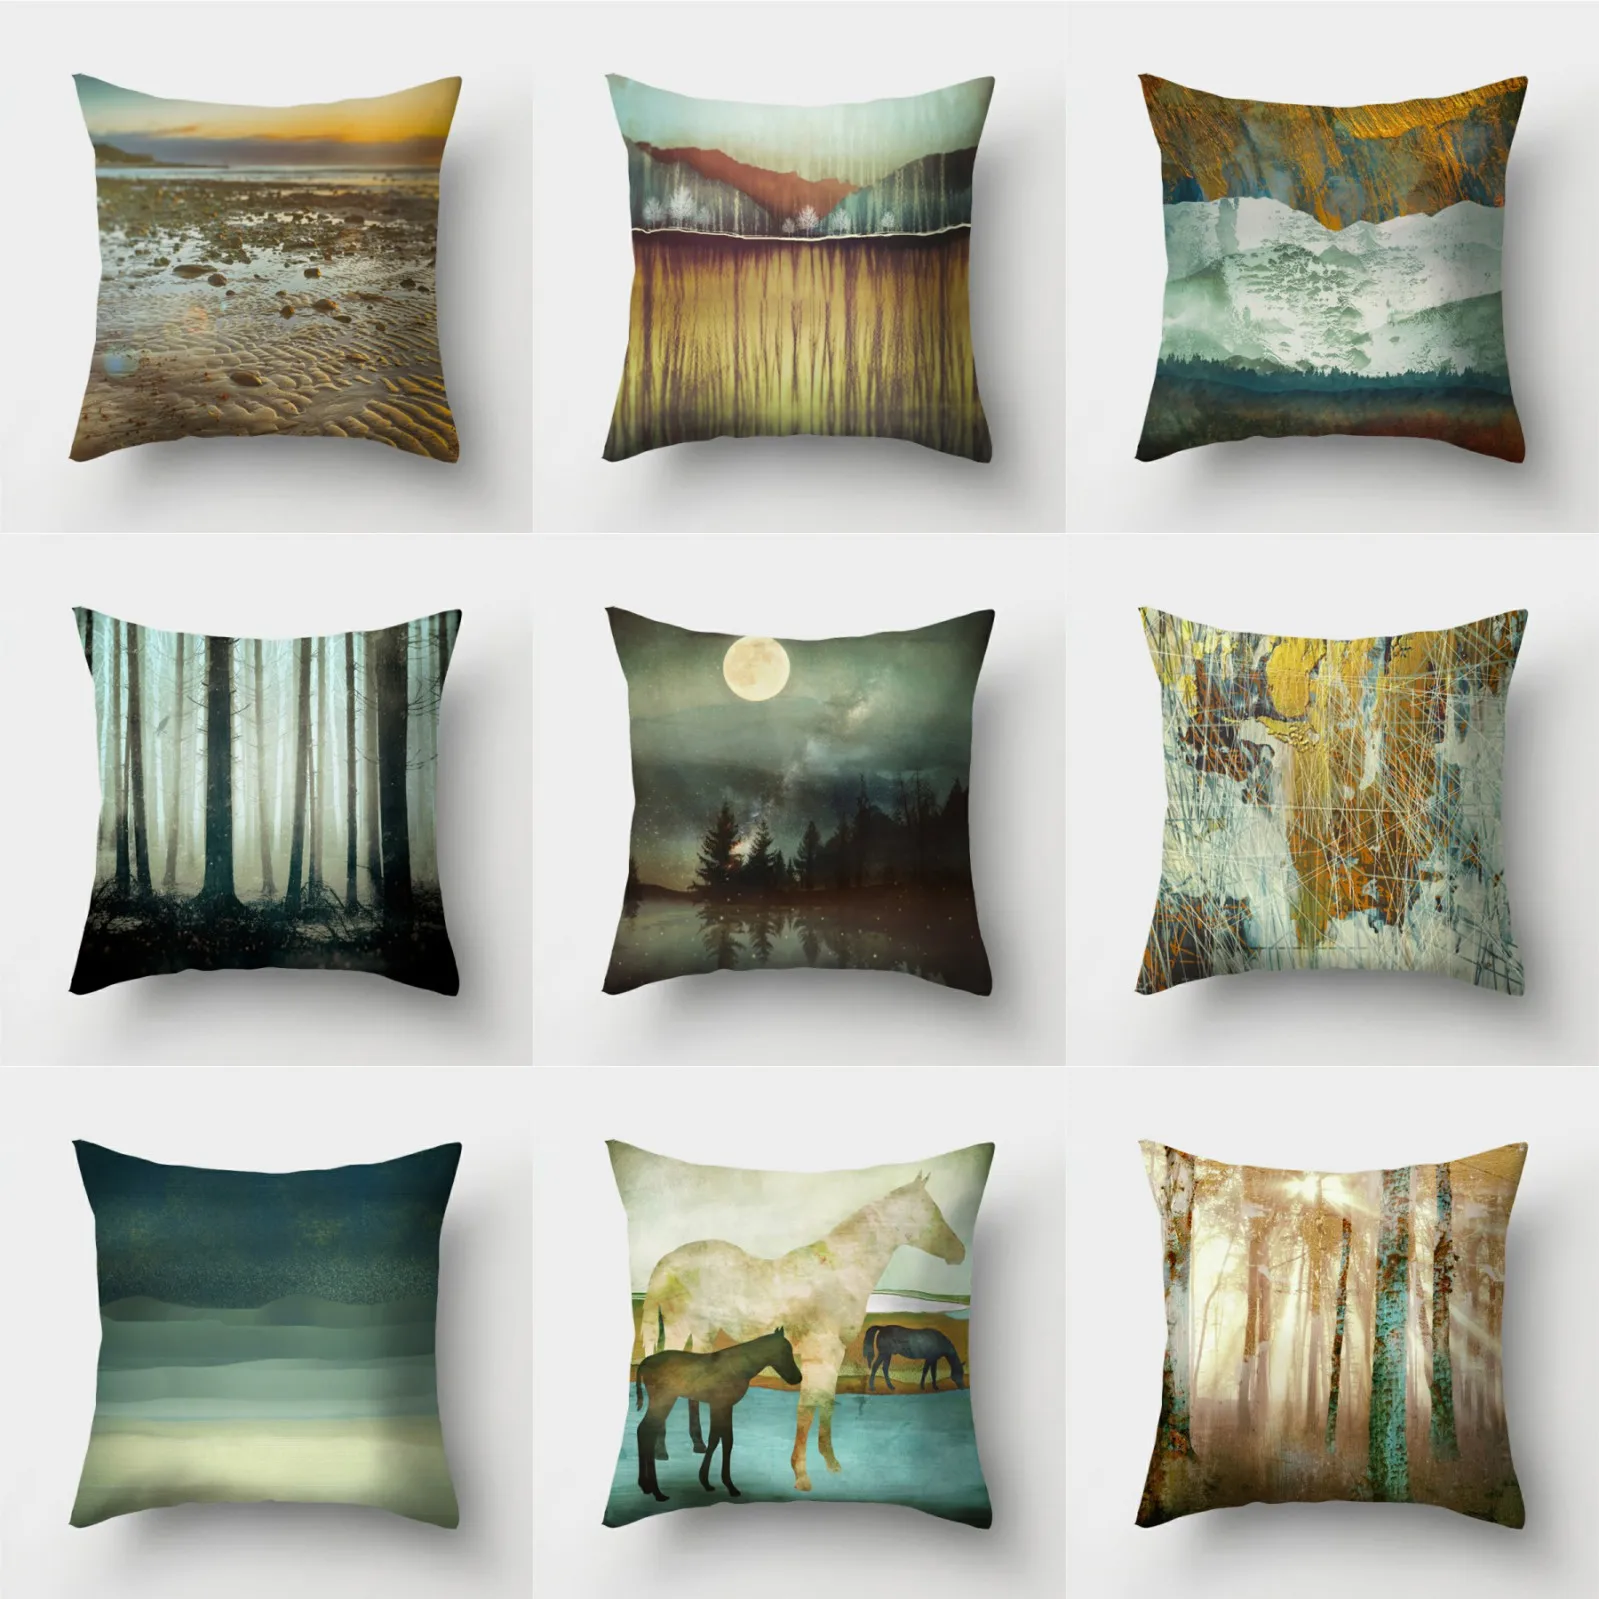 18" Landscape Polyester Pillow Case Cushion Cover Waist Cover Square Home Decor 